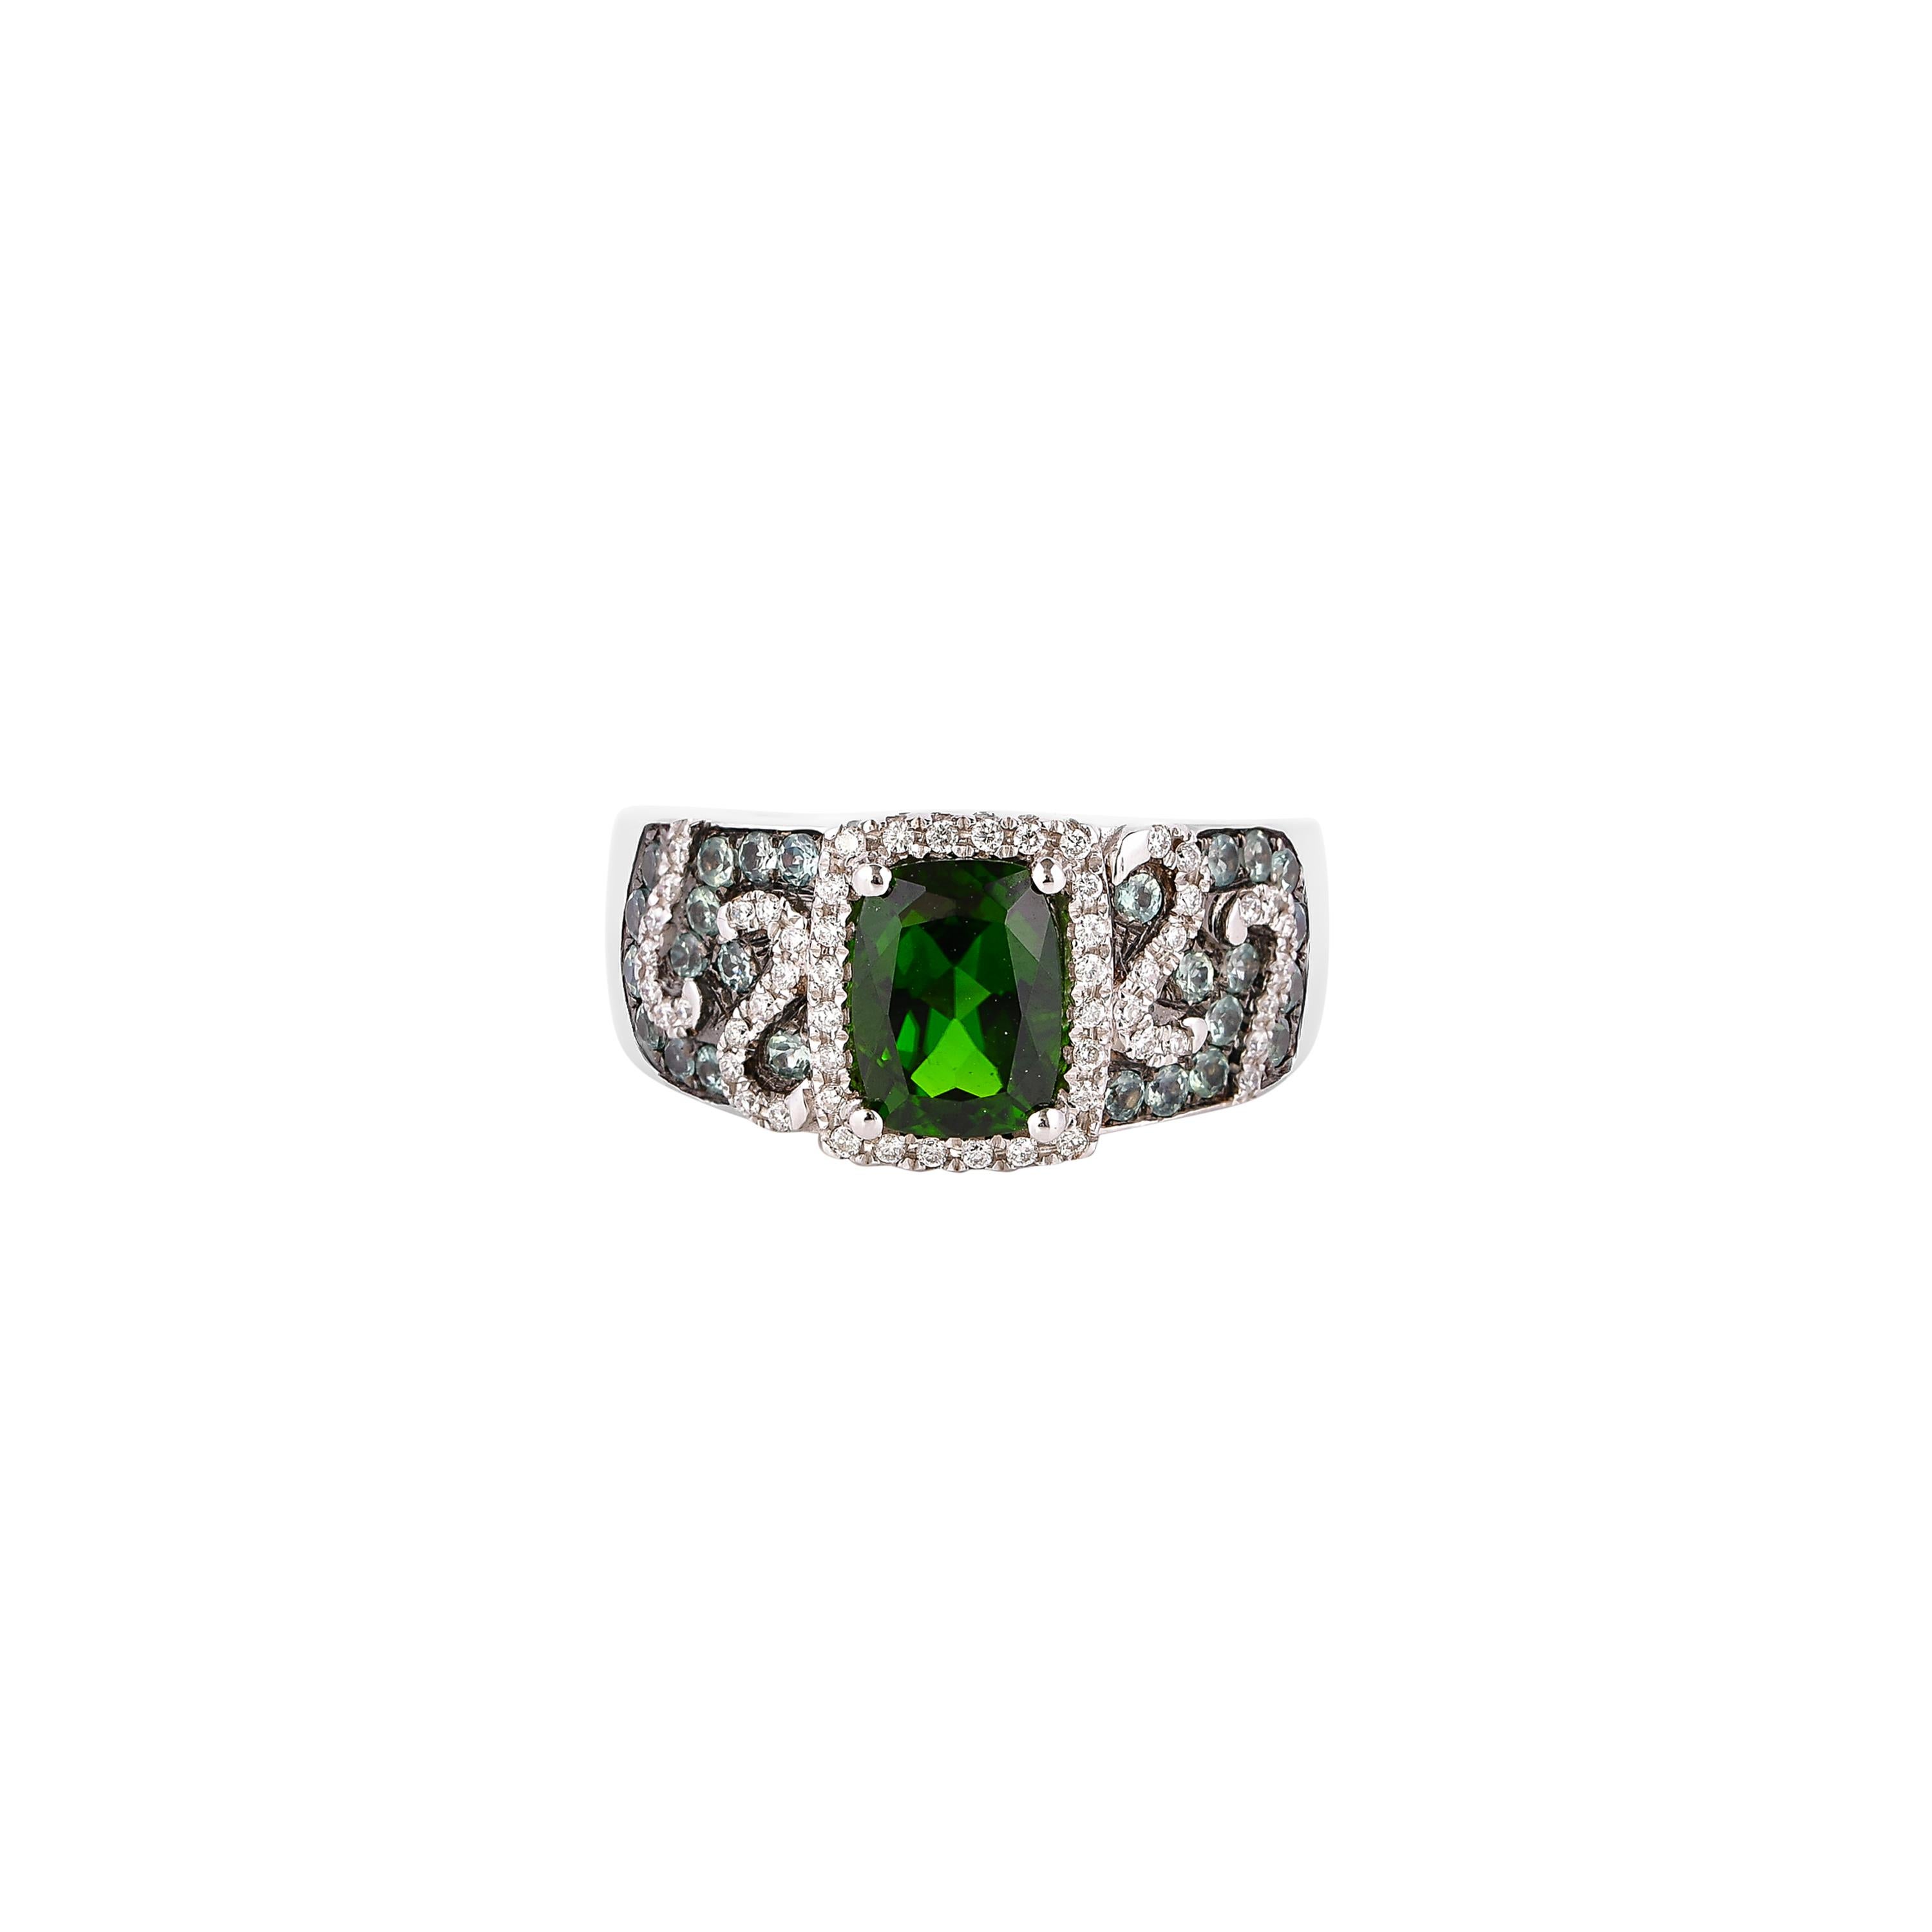 Cushion Cut 1.50 Carat Chrome Diopside Ring in 14 Karat White Gold For Sale